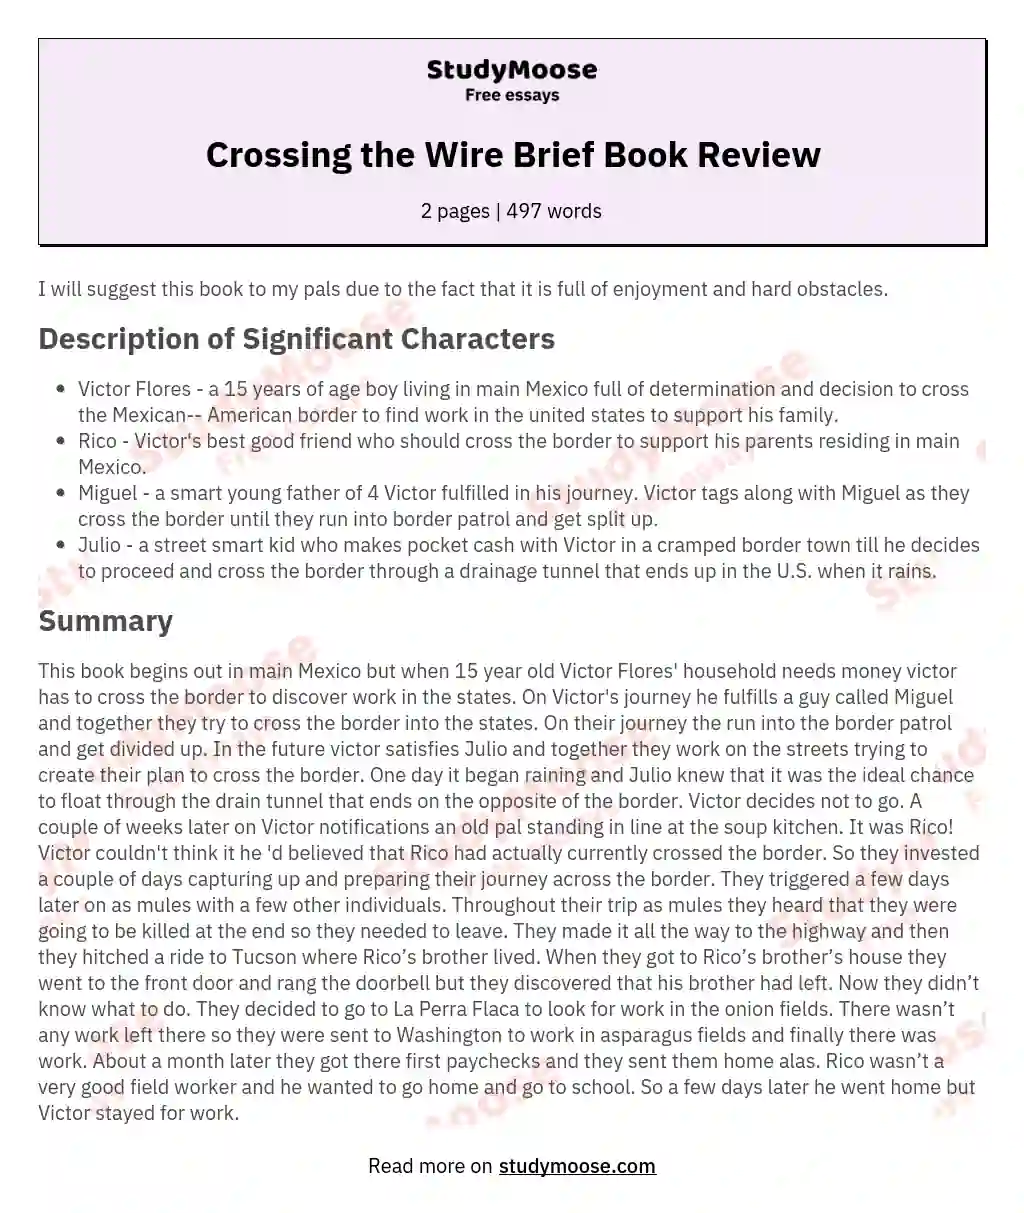 Crossing the Wire Brief Book Review